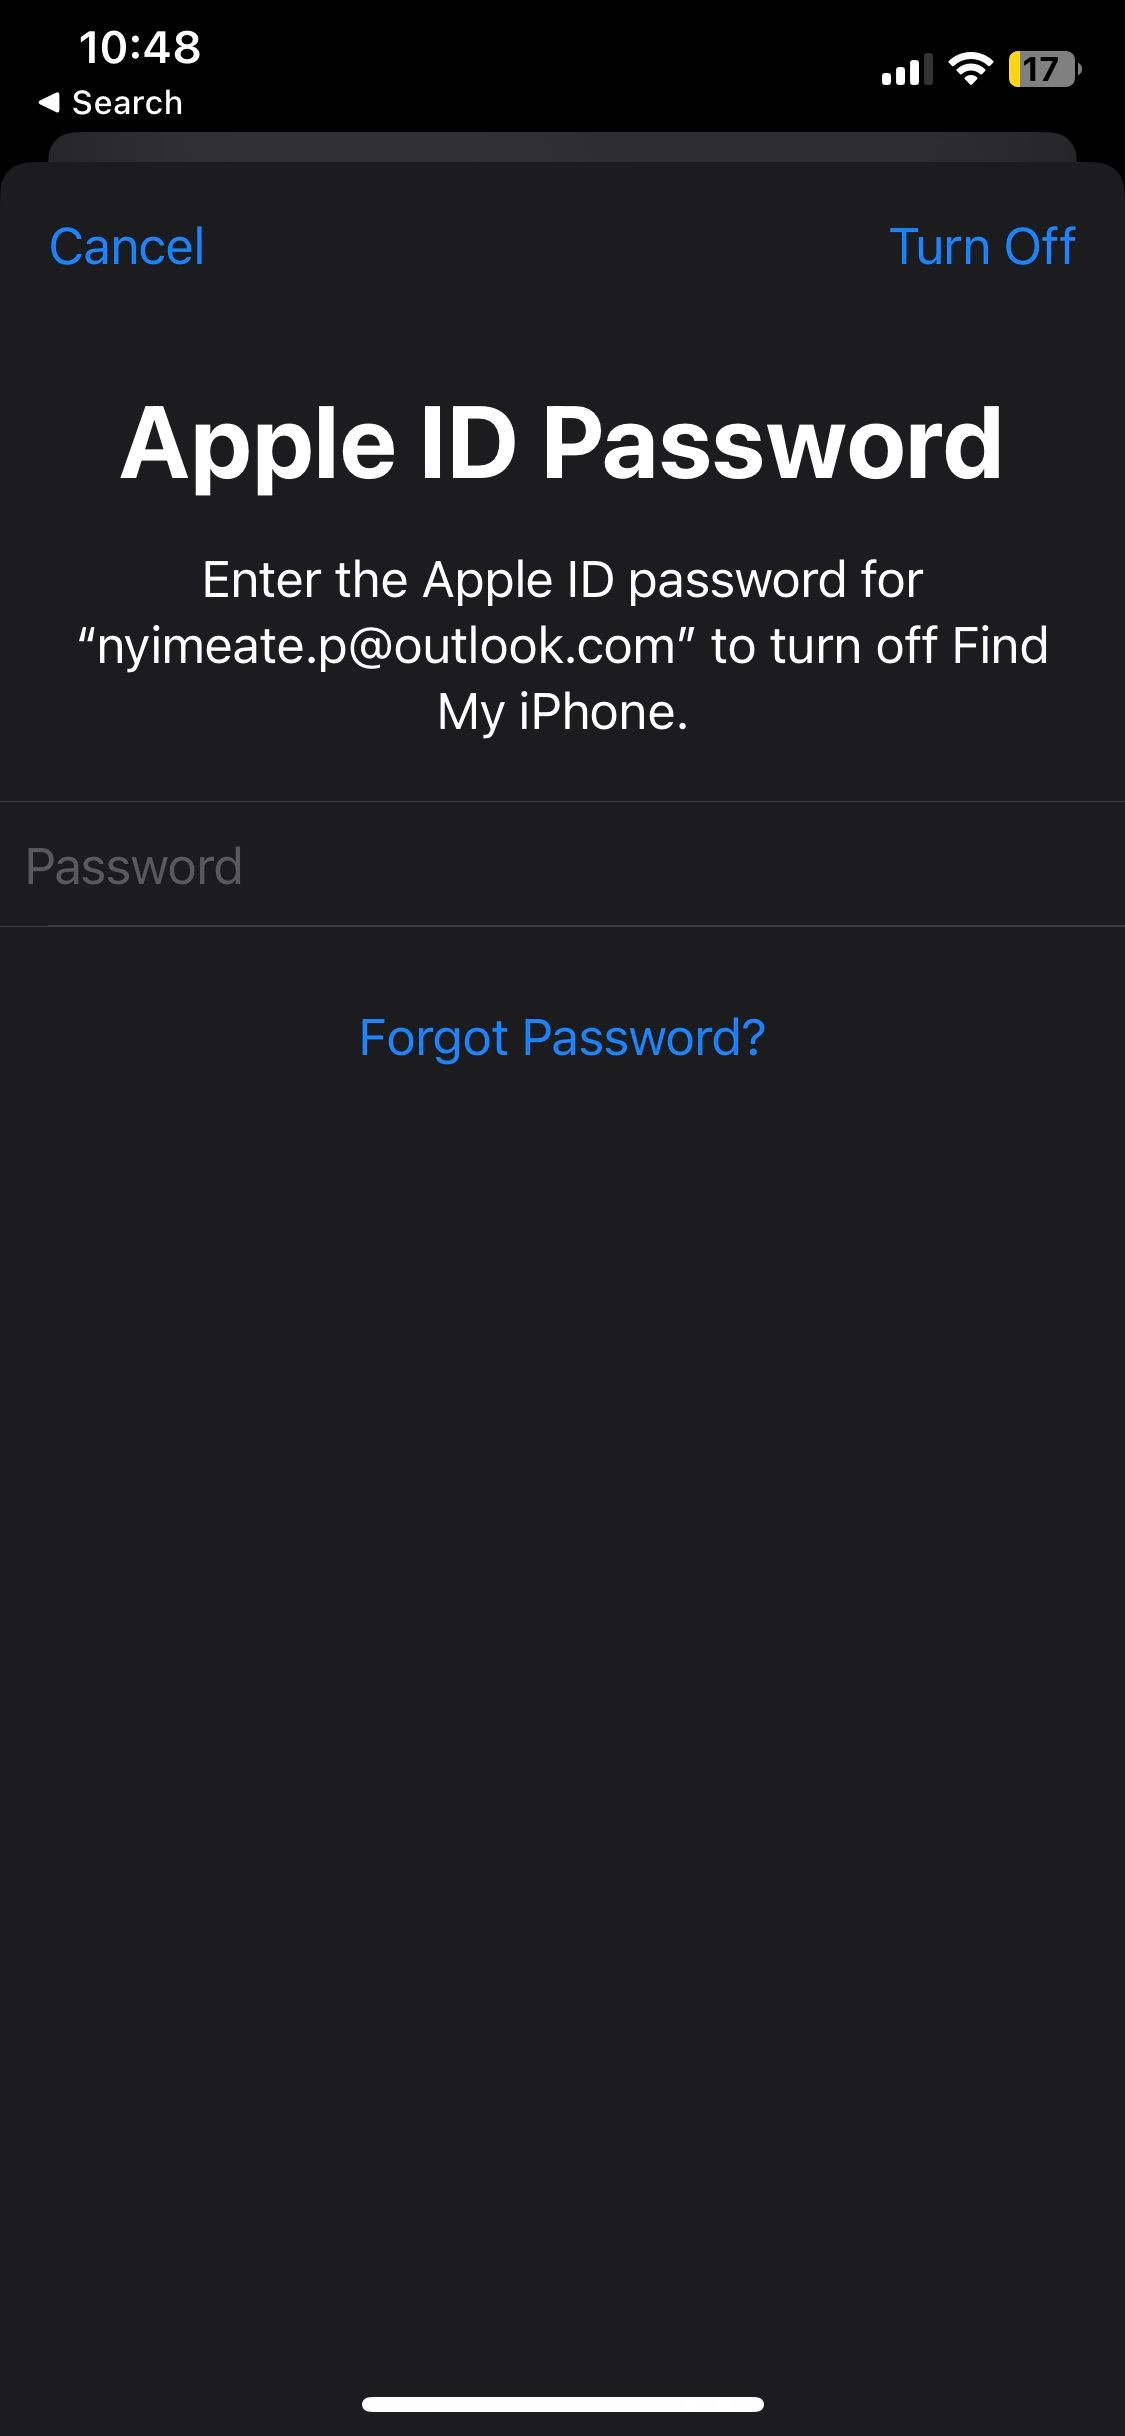 Prompt to enter Apple ID password